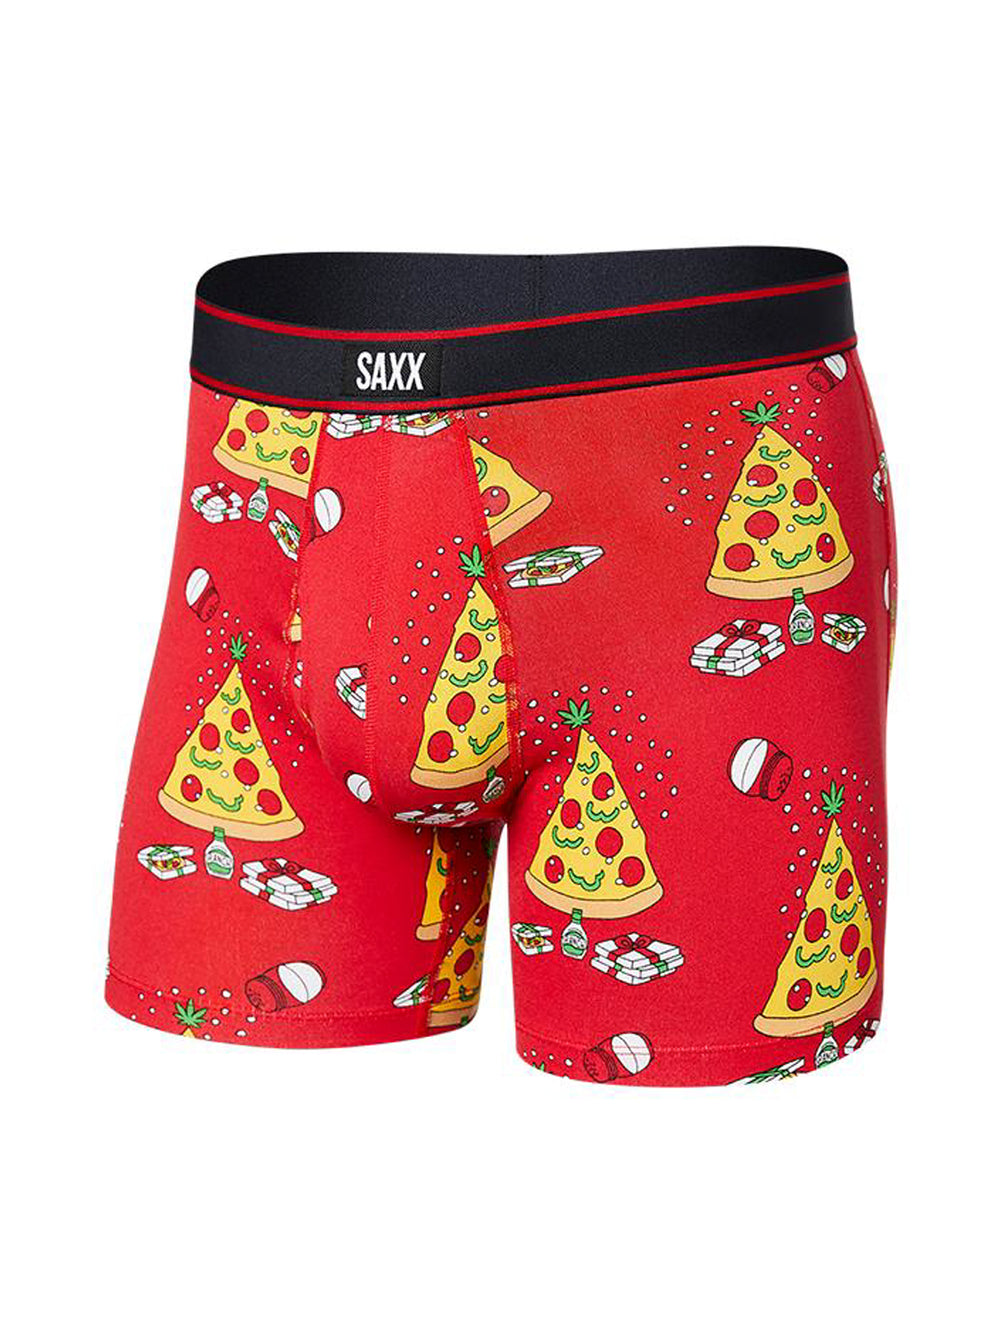 Saxx Daytripper Polyester Boxer Briefs, Choose Size/Color